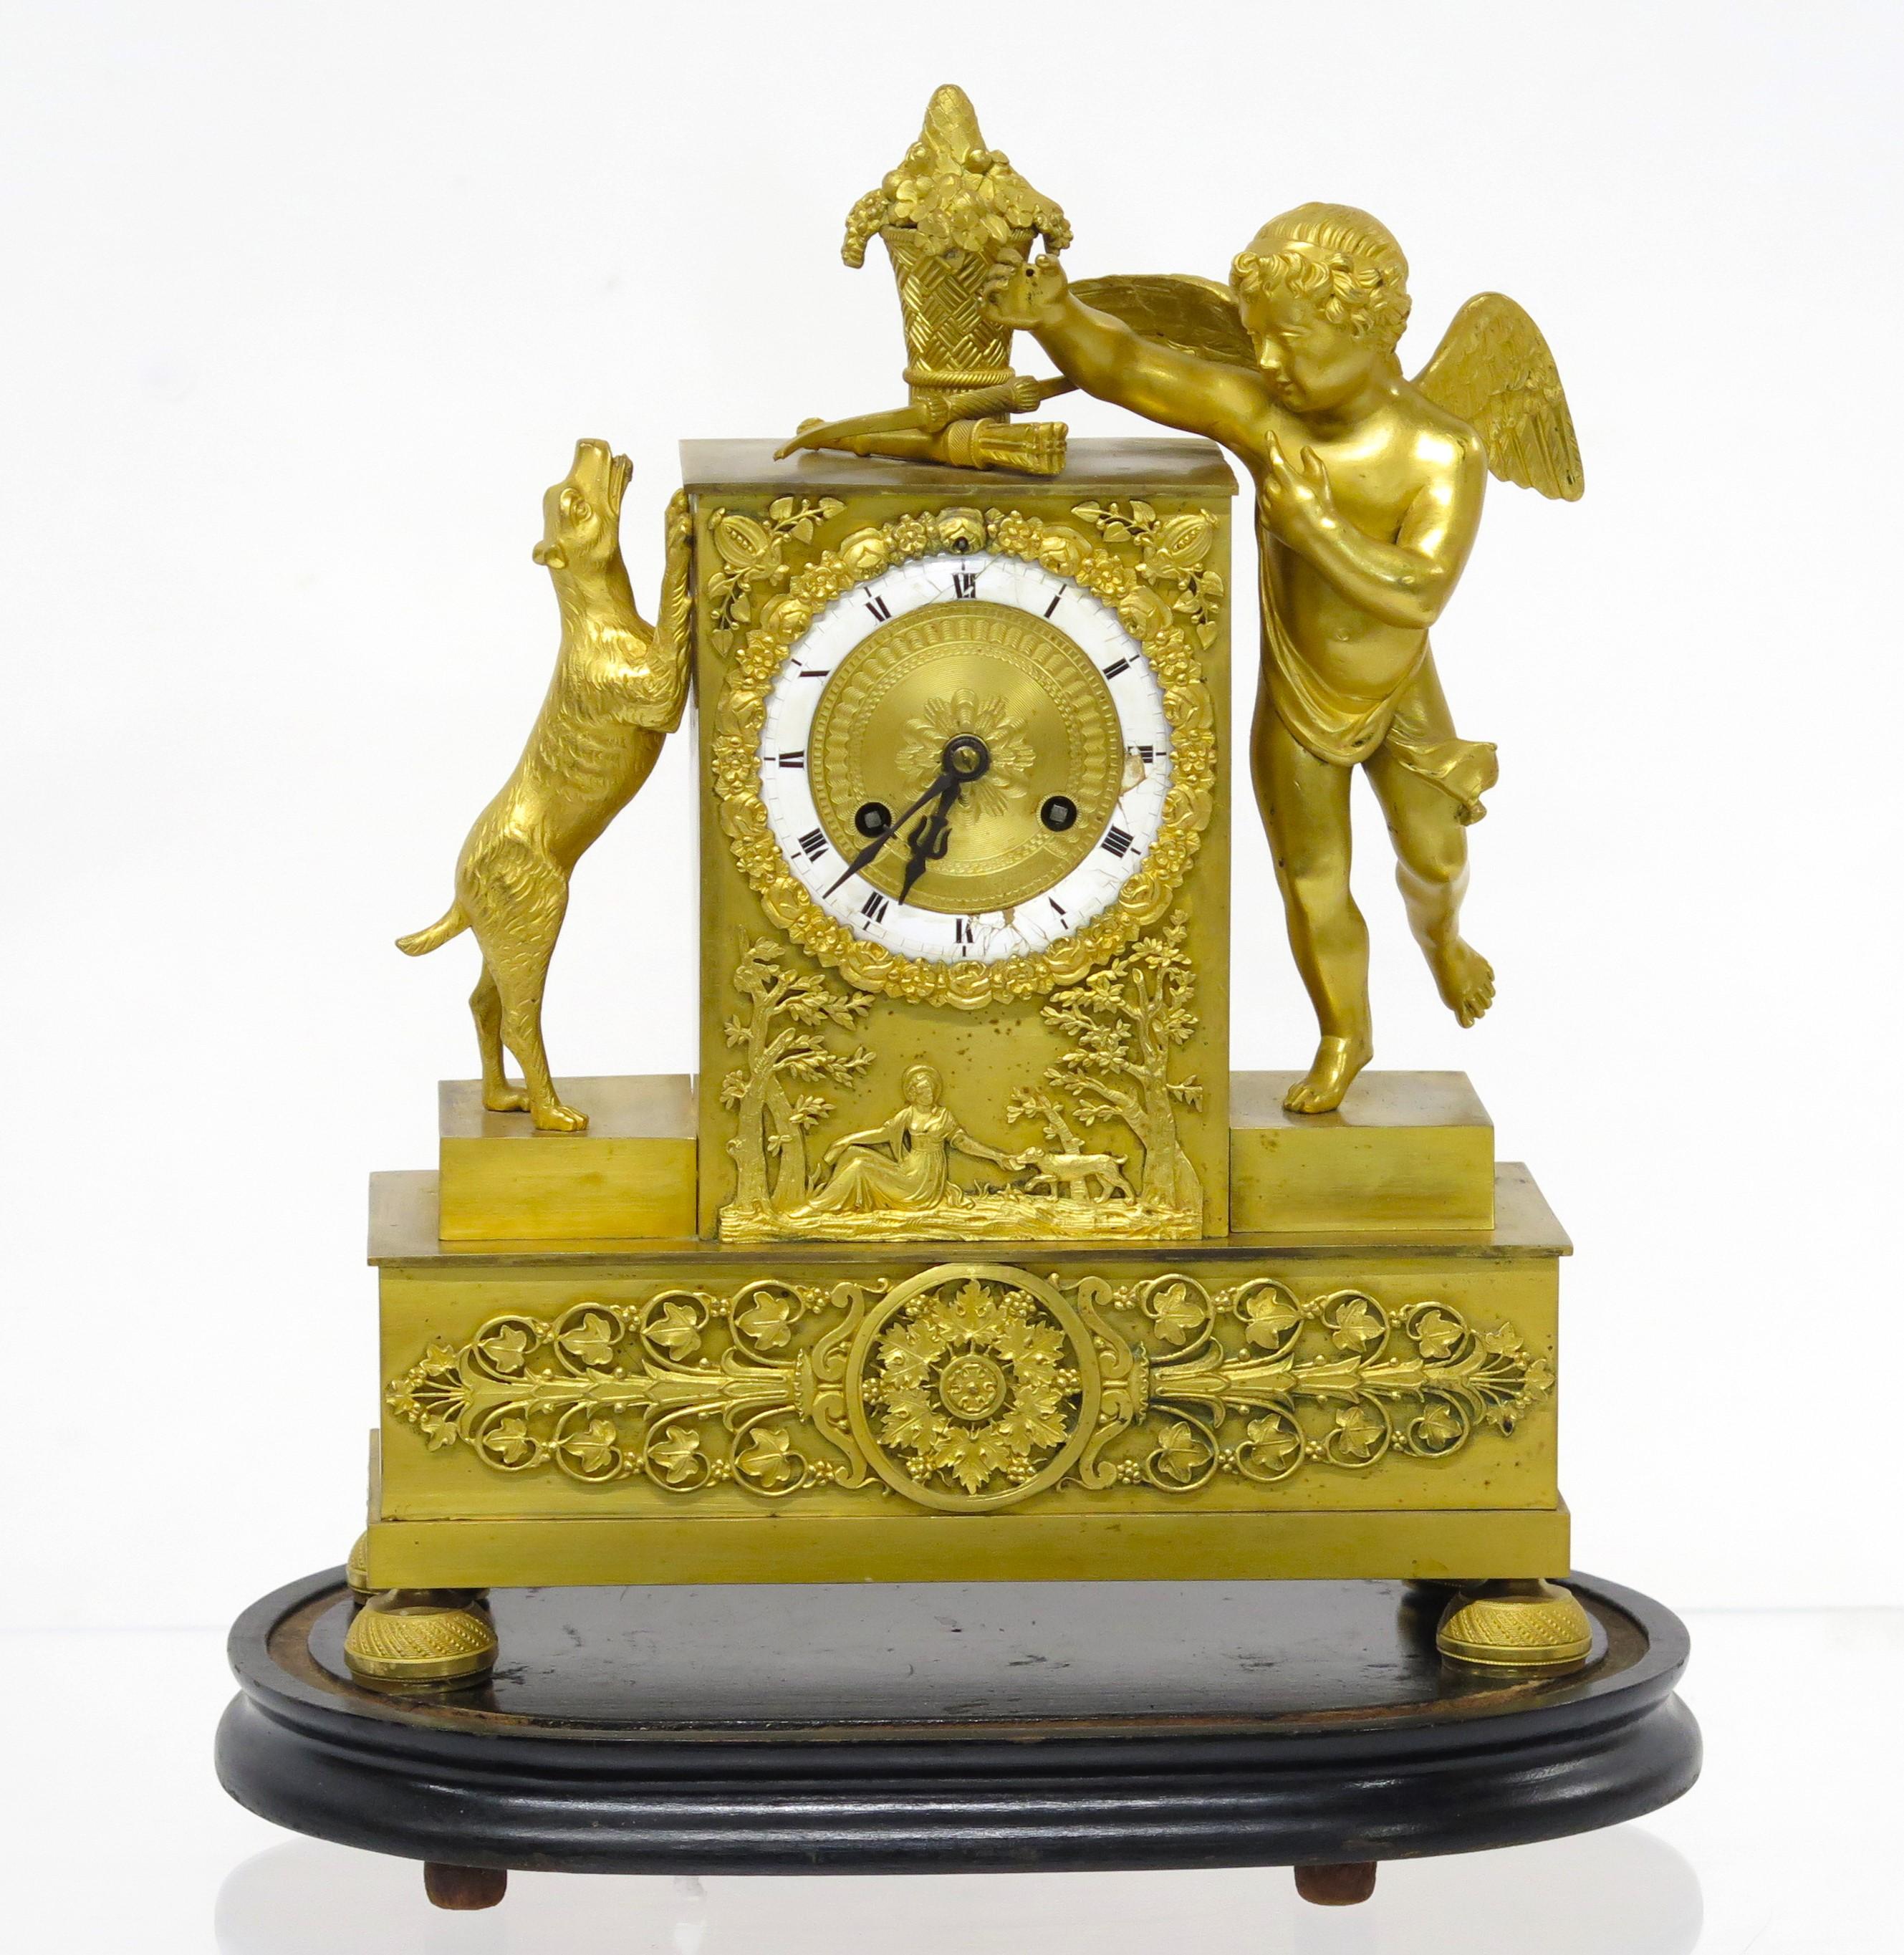 a Charles X gilt bronze mantel clock with Cupid and a dog on its hind legs barking / jumping / or begging, the figures flank the rectangular clock, the dog appears to be trying to get the basket on top of the clock, Cupid may be missing something